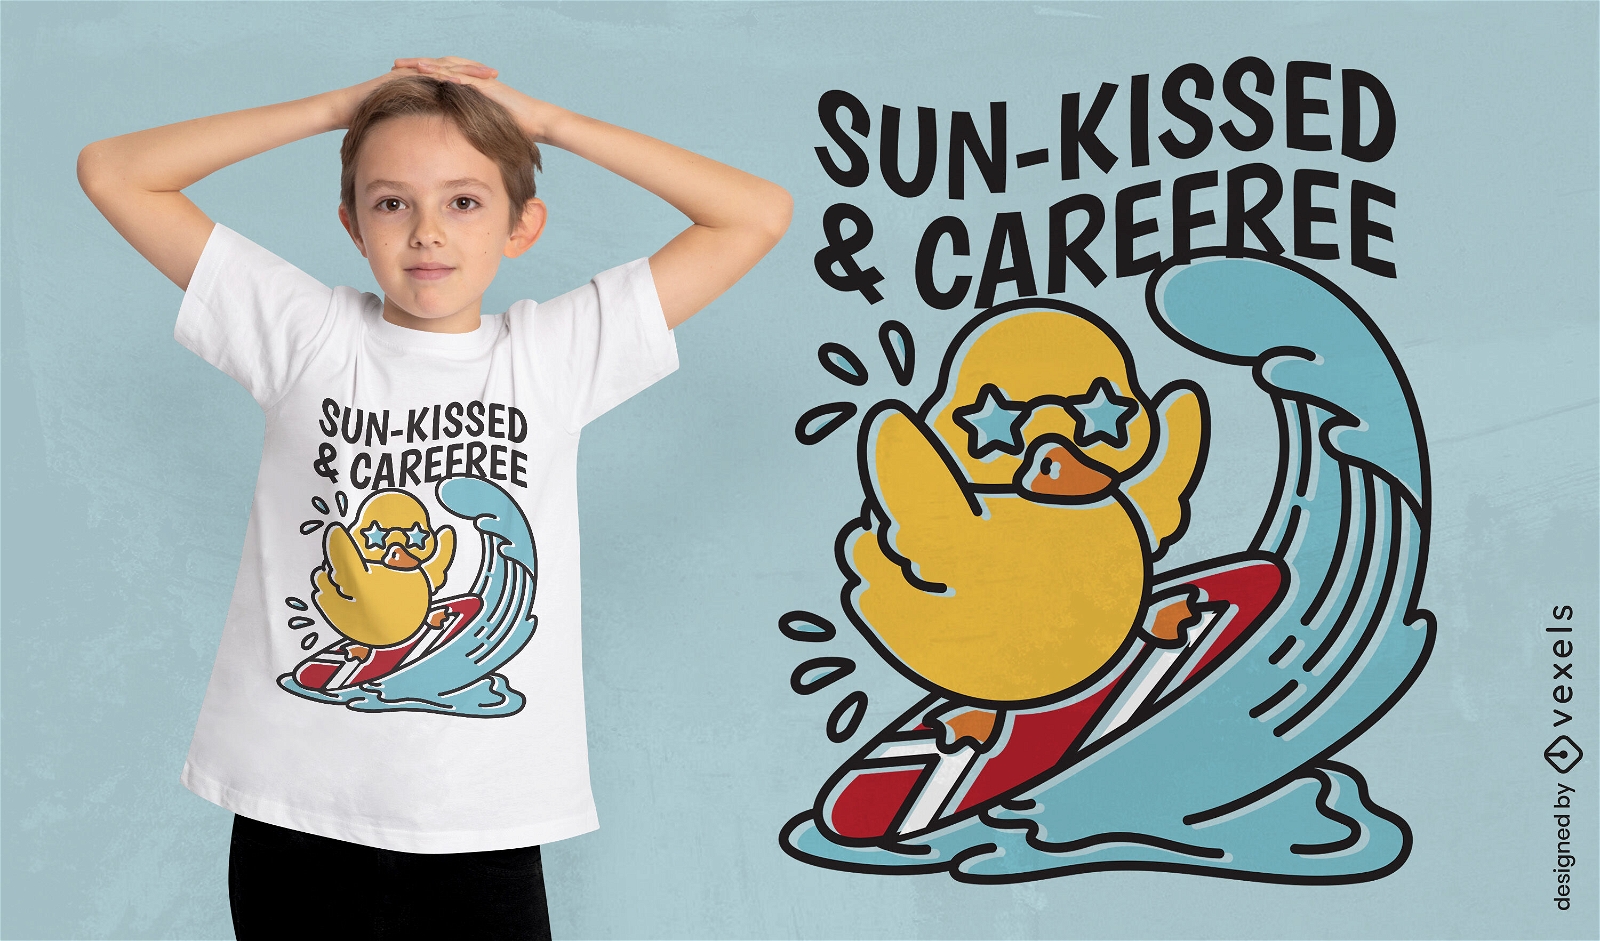 Sun-kissed and carefree t-shirt design